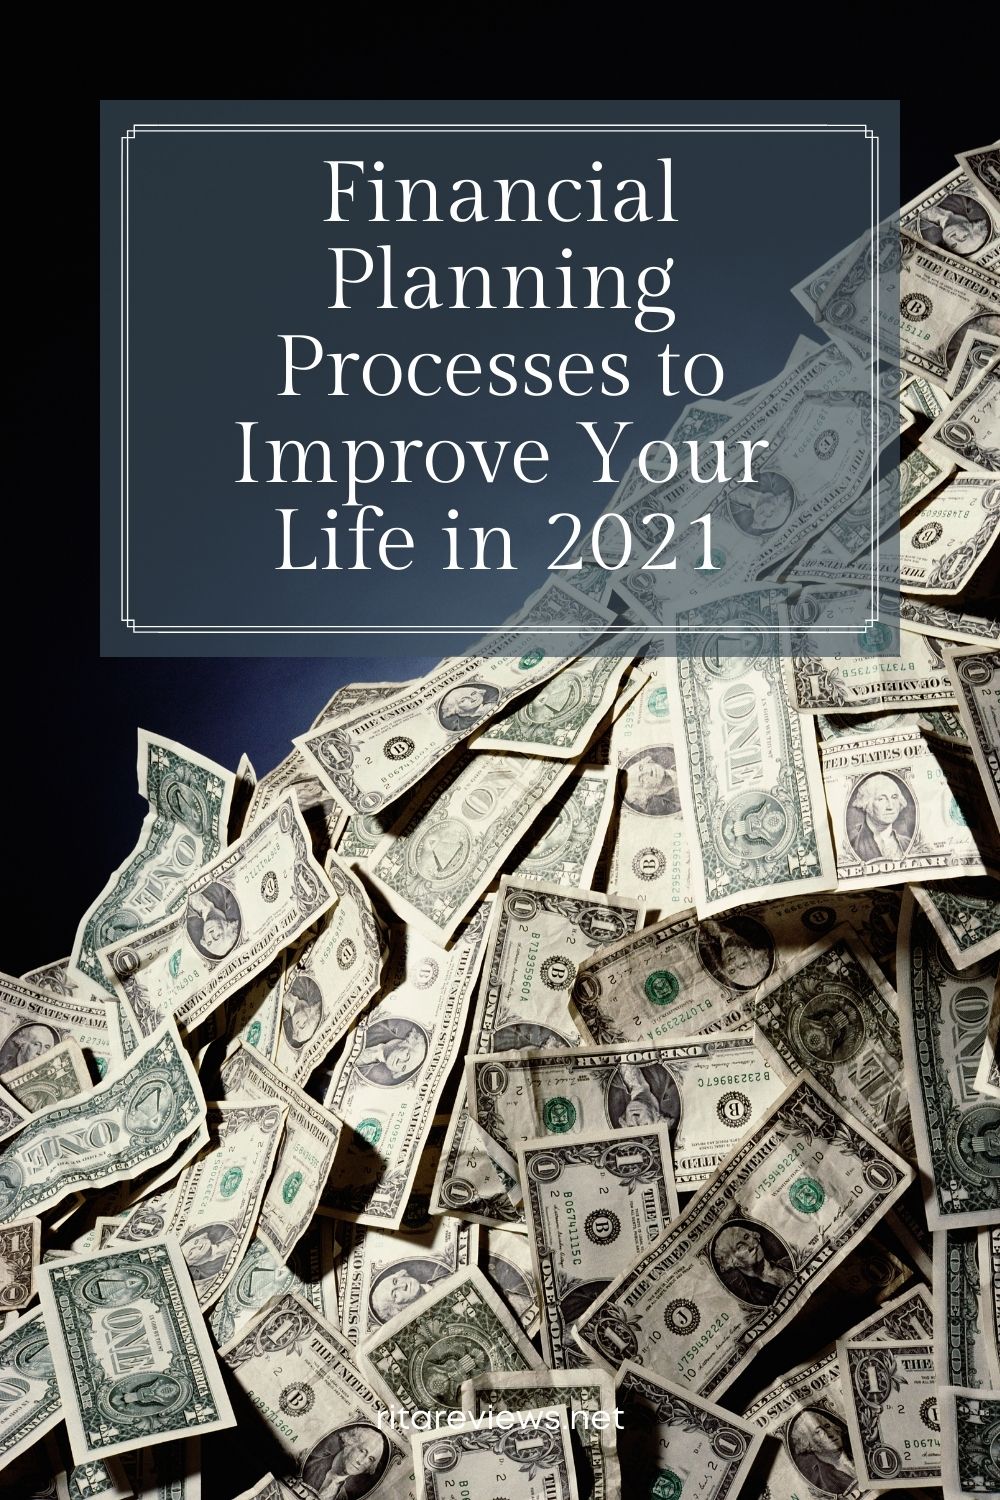 Financial Planning Processes to Improve Your Life in 2021